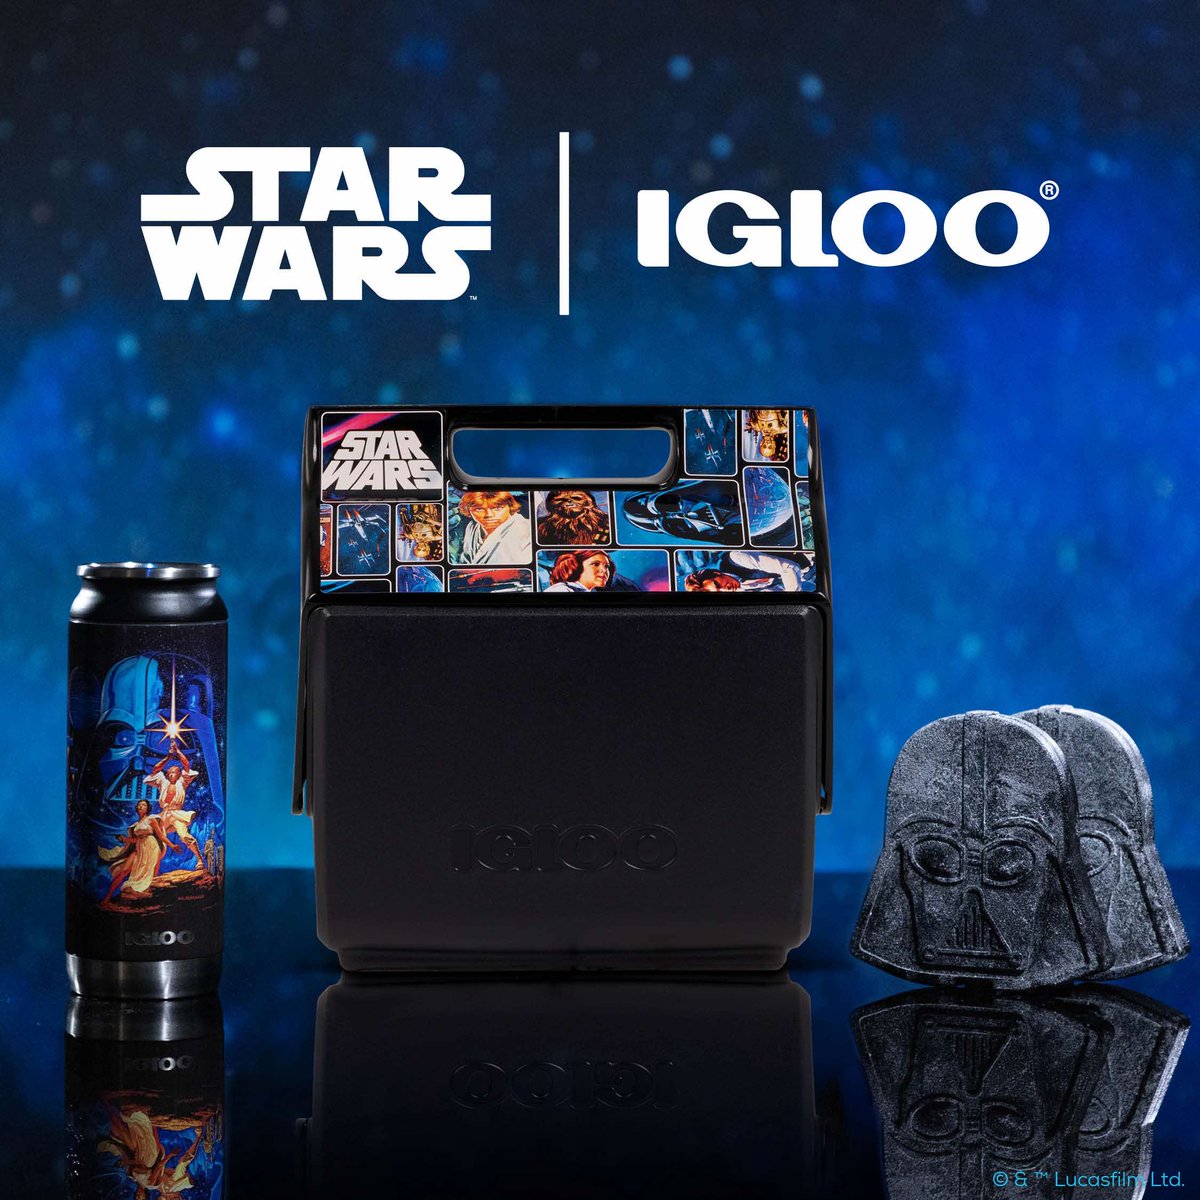 For Star Wars Day, we launched more coolness across the galaxy. May the 4th Be With You! #IglooCoolers